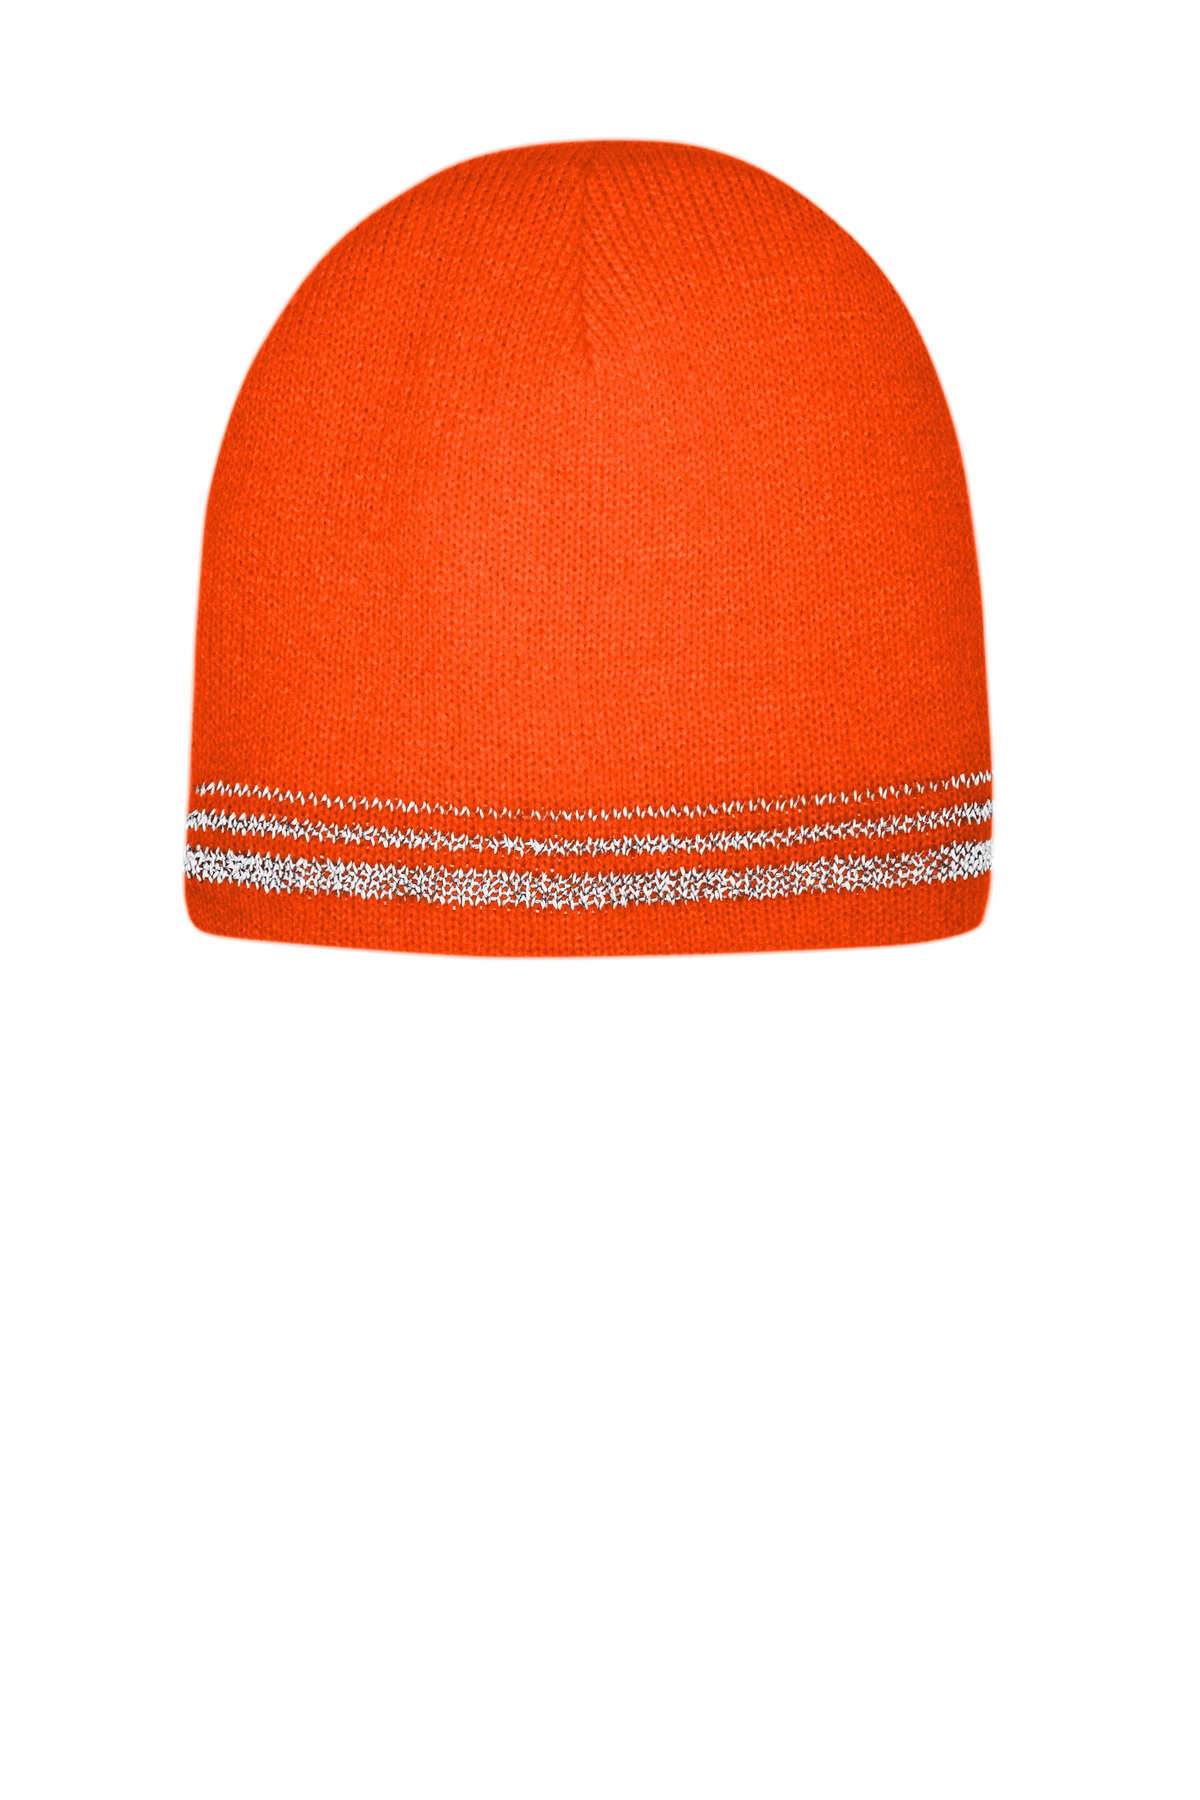 CornerStone Lined Enhanced Visibility with Reflective Stripes Beanie-CornerStone